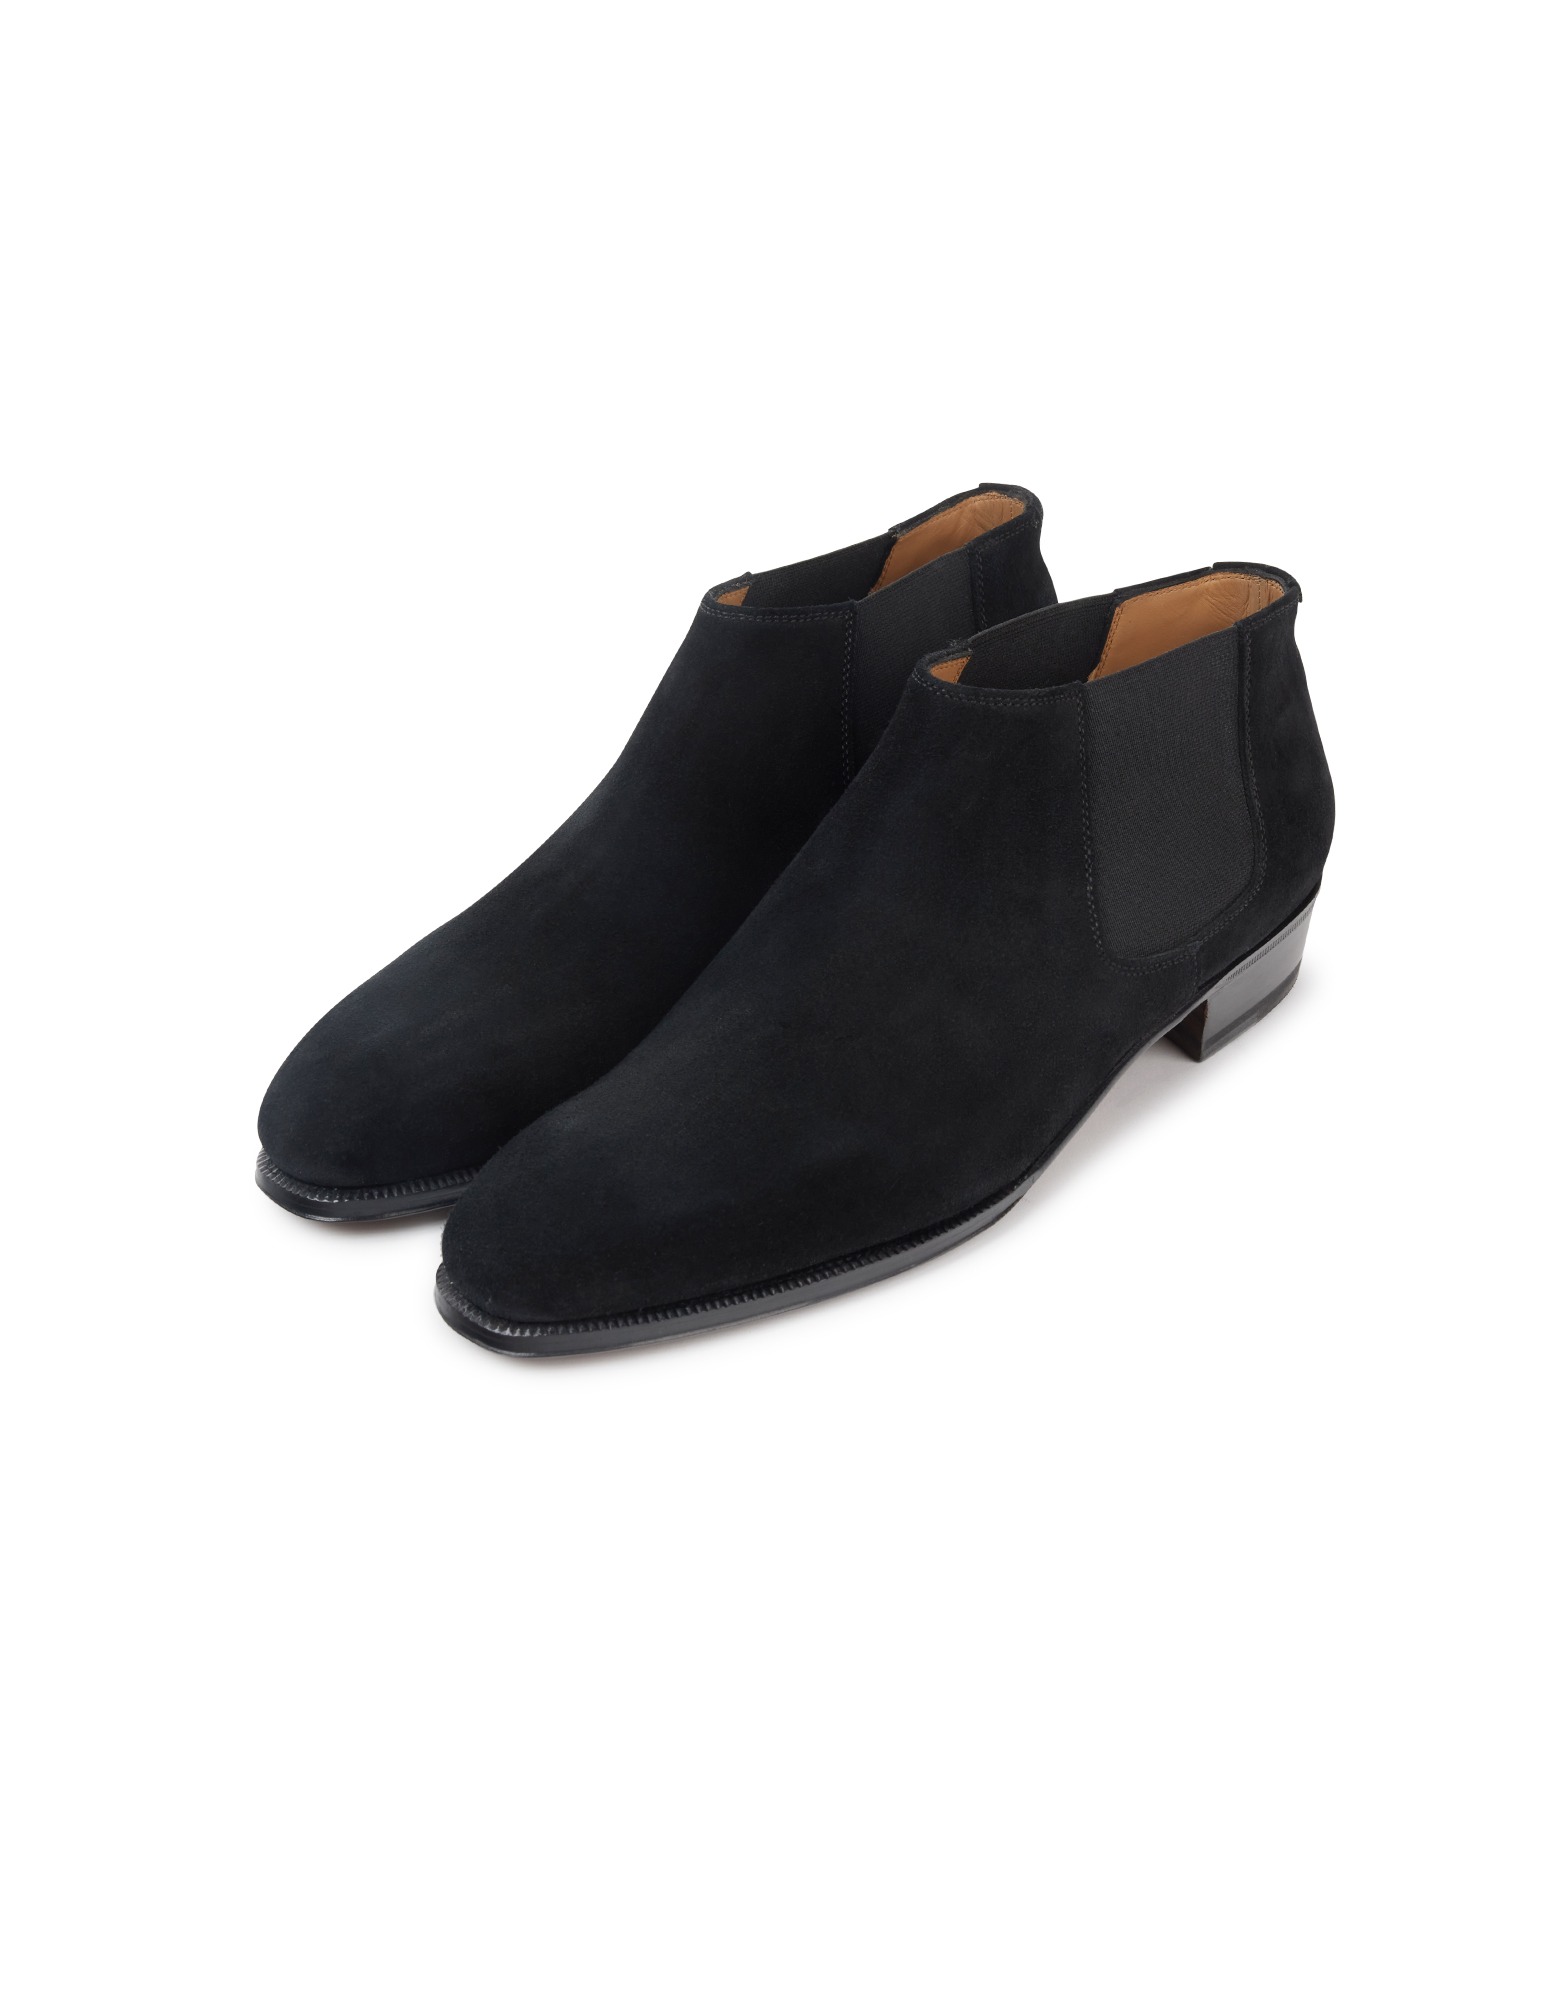 Cary Grant Suede (Black)